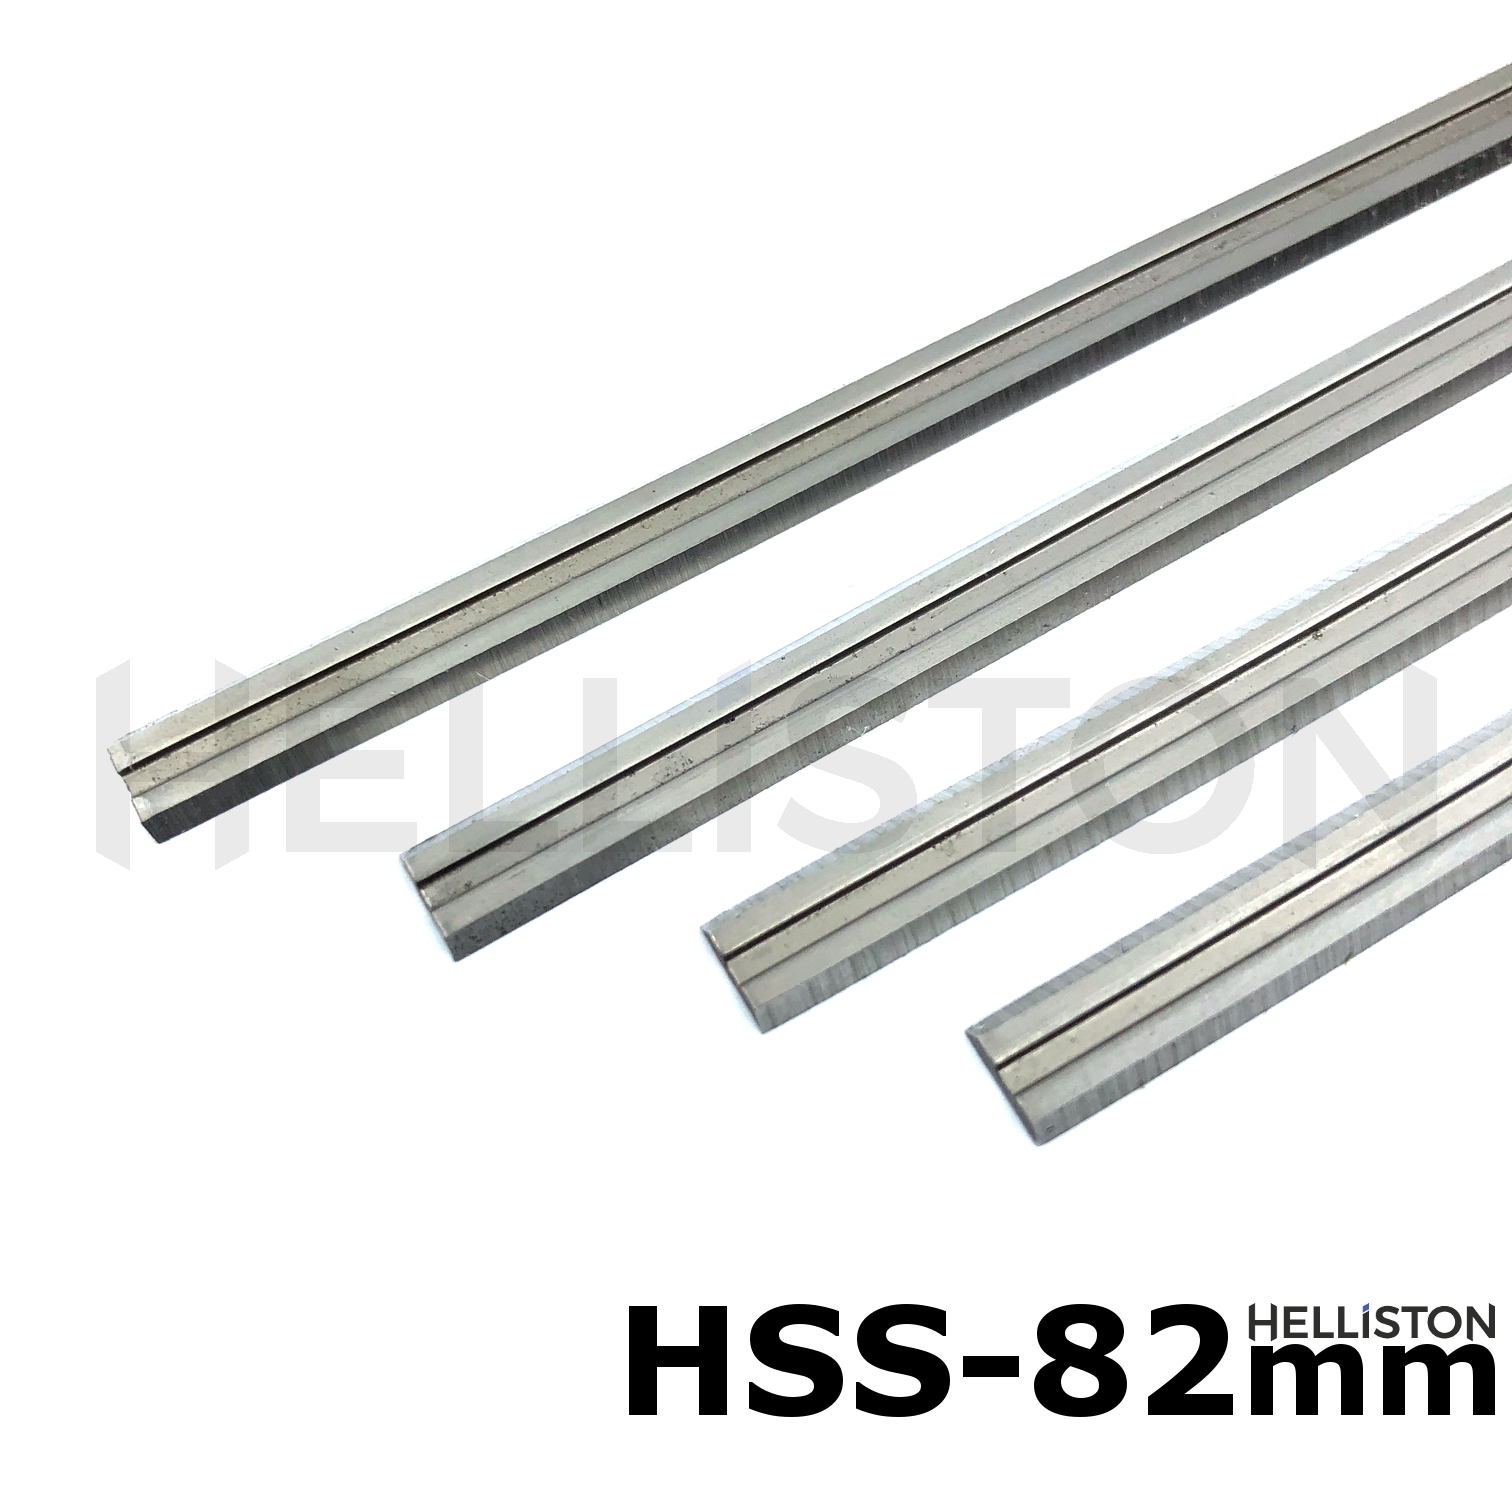 HSS Planer Blades, Reversible knives 82 x 5,5 x 1,1 mm, High-speed-steel, double-sided blades for electrical hand planers AEG EH 82, EH 82-l, EH 450, EH 700, EH 700R, H 500, H 700, HE 800 Black & Decker BD 711, DN 710 Bosch: C 2-82, C 3-82, C 20-82, C 30-82, C 100, C 150, C 200, C 300; GHO 18 V-LI, GHO 26-82, GHO 31-82, GHO 36-82C, GHO 40-82C; PHO 15-82, PHO 16-82, PHO 25-82, PHO 35-82 jne. Fein: HS 2151 Haffner: FH 222, FH 224 Hitachi: FP 20 A, P 20 SA, P 20 V HolzHer: 2321, 2323, 2330 Mafell: EHU 82, MHU 82 Makita: 1001, 1100, 1125, 1125 B, 1600, 1900 B, 1901, 1923B, 1923H, 1923 HO Metabo: 4382, HO 0882, HO 8382 Skil: 94 H, 95 H, 97 H